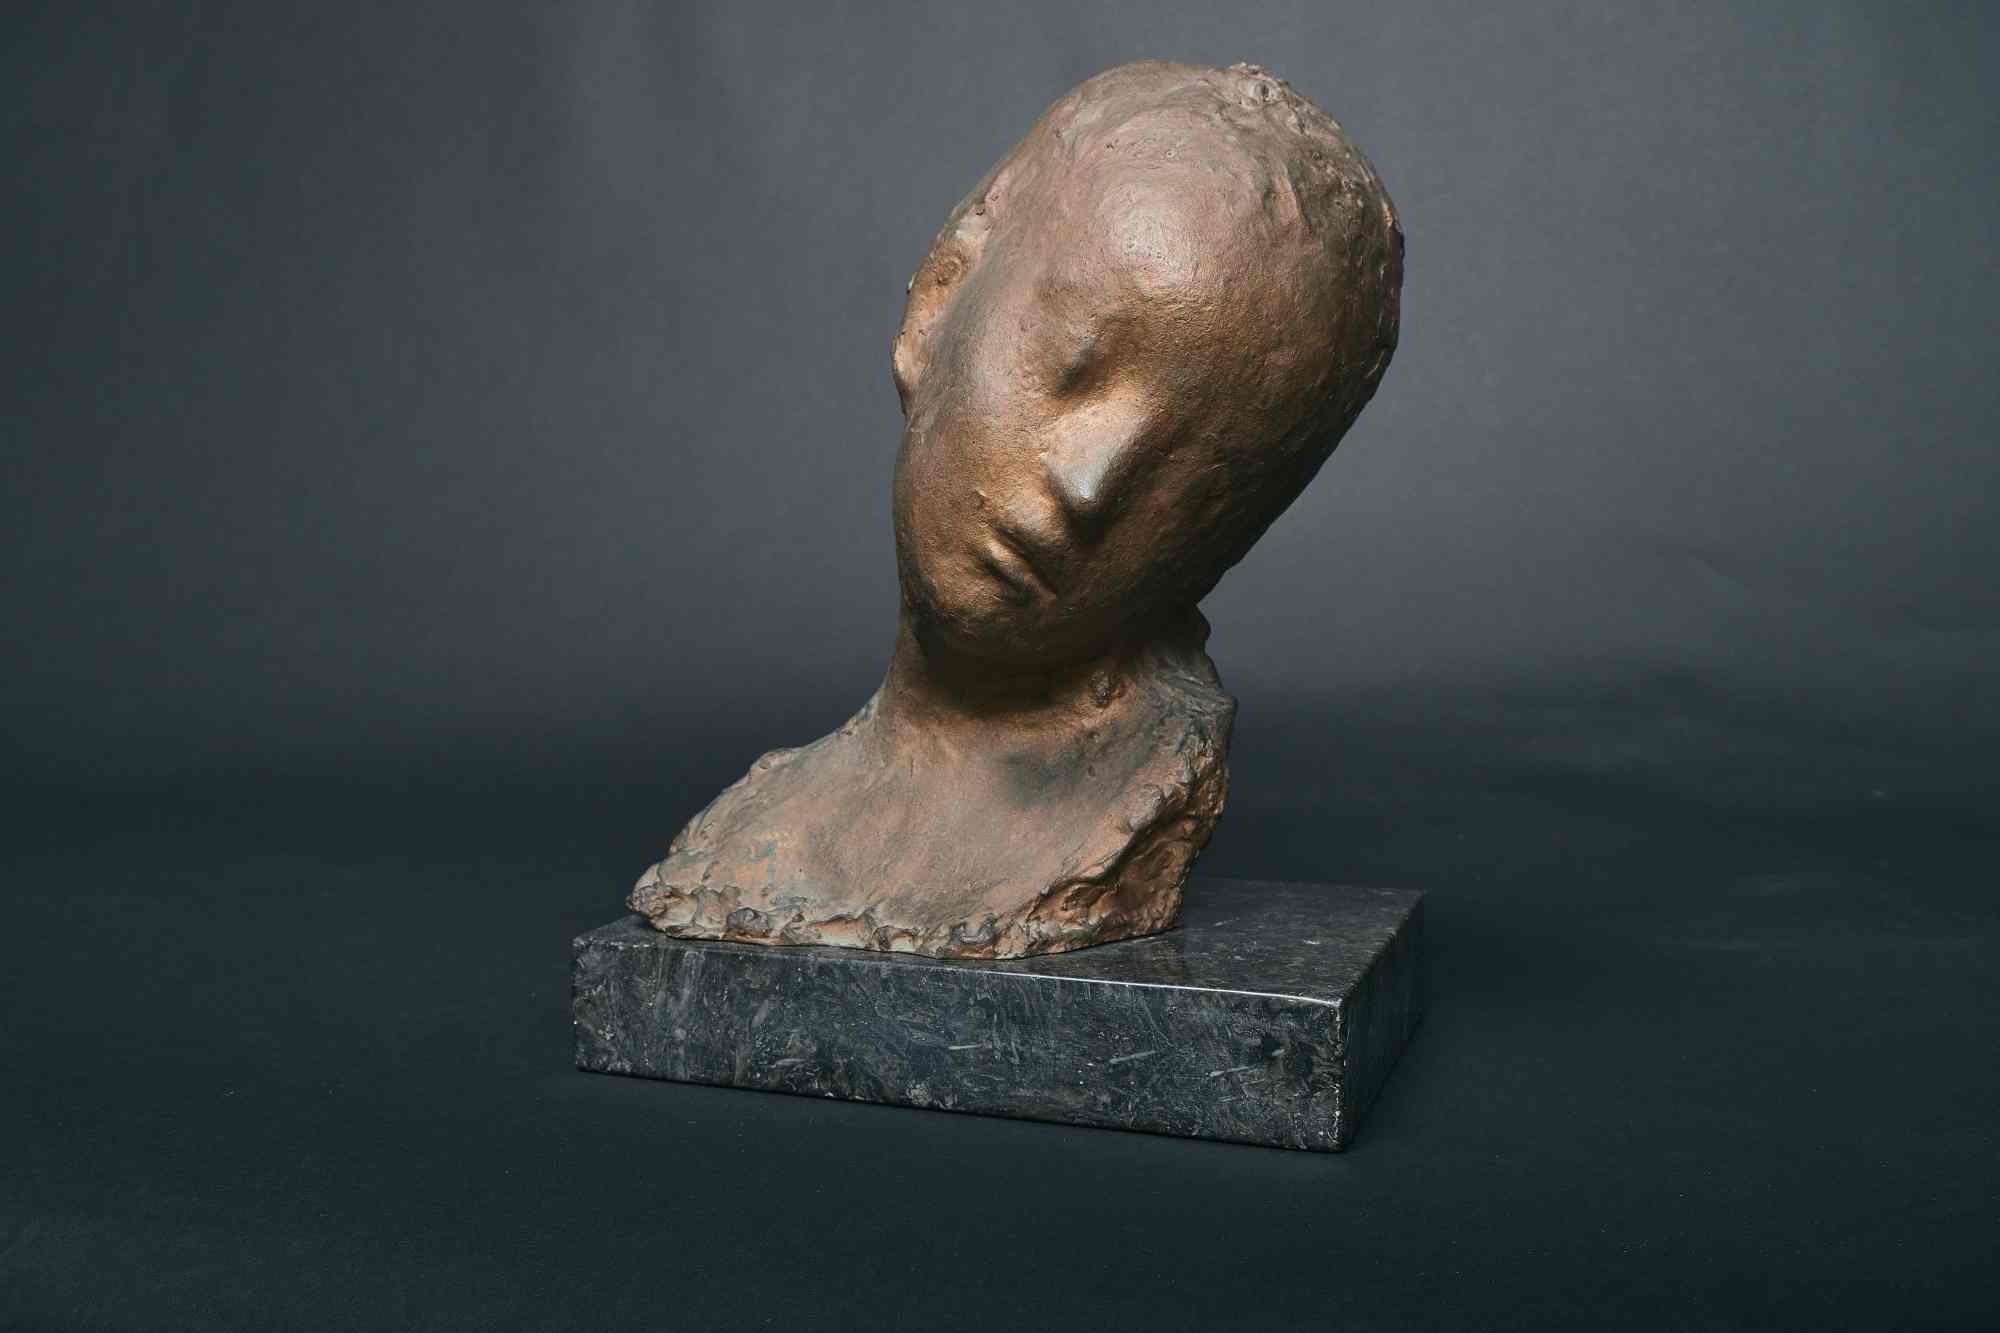 Bronze signed by Medardo Rosso (Turin 1858 - Milan 1928). This model, which he repeated several times, exists in several versions. The bronze comes from a private collection formed in the sixties, in which there were also other works by well-known